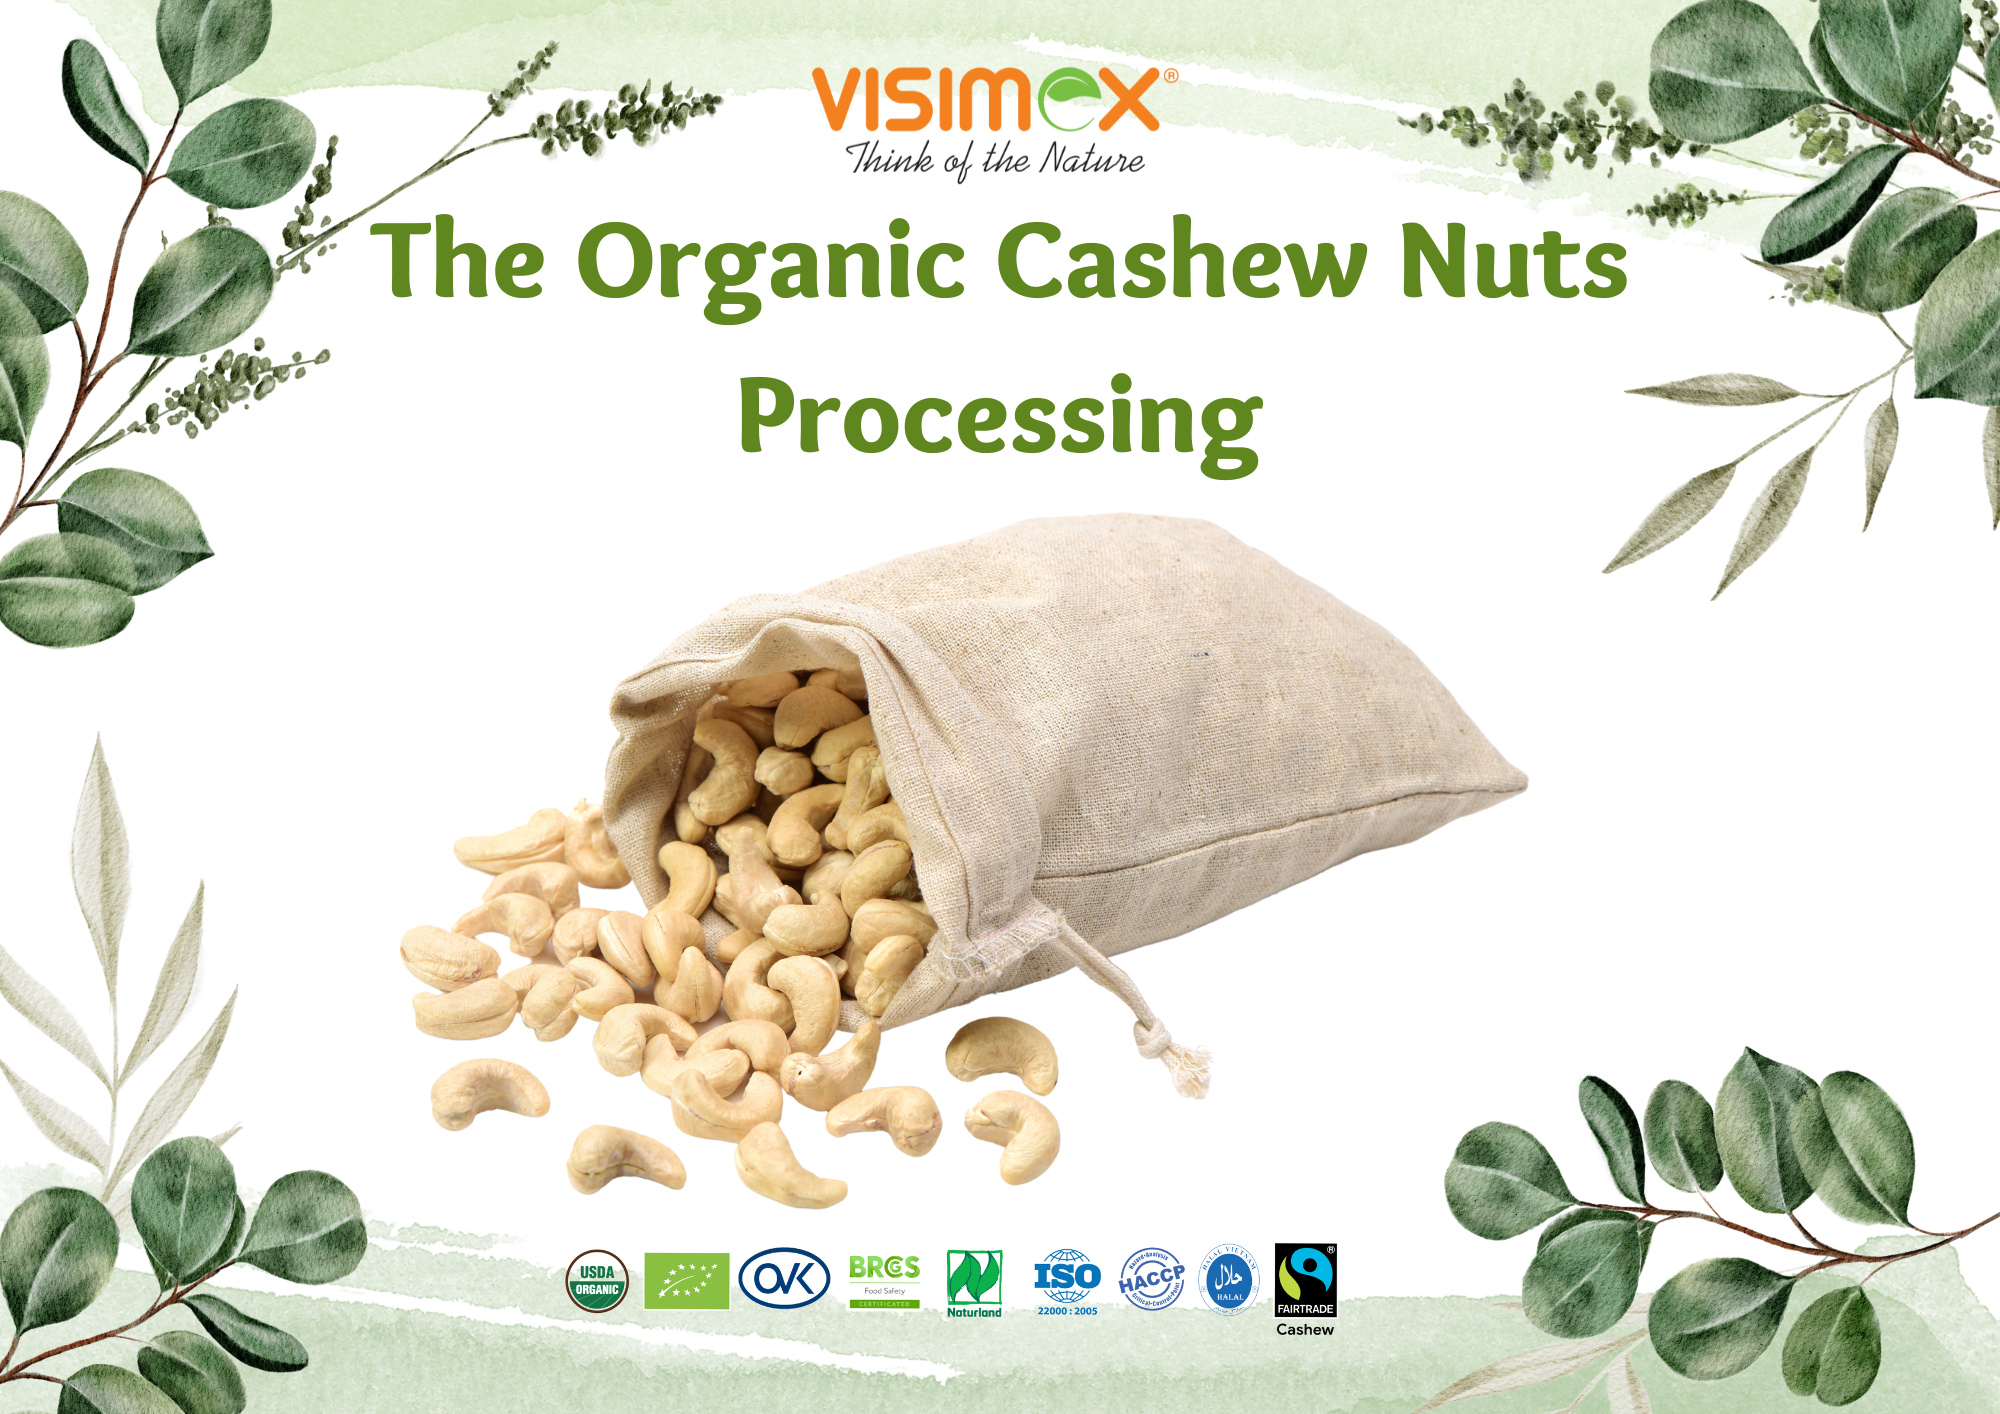 The Organic Cashew Nuts Processing: From Harvesting to Packaging